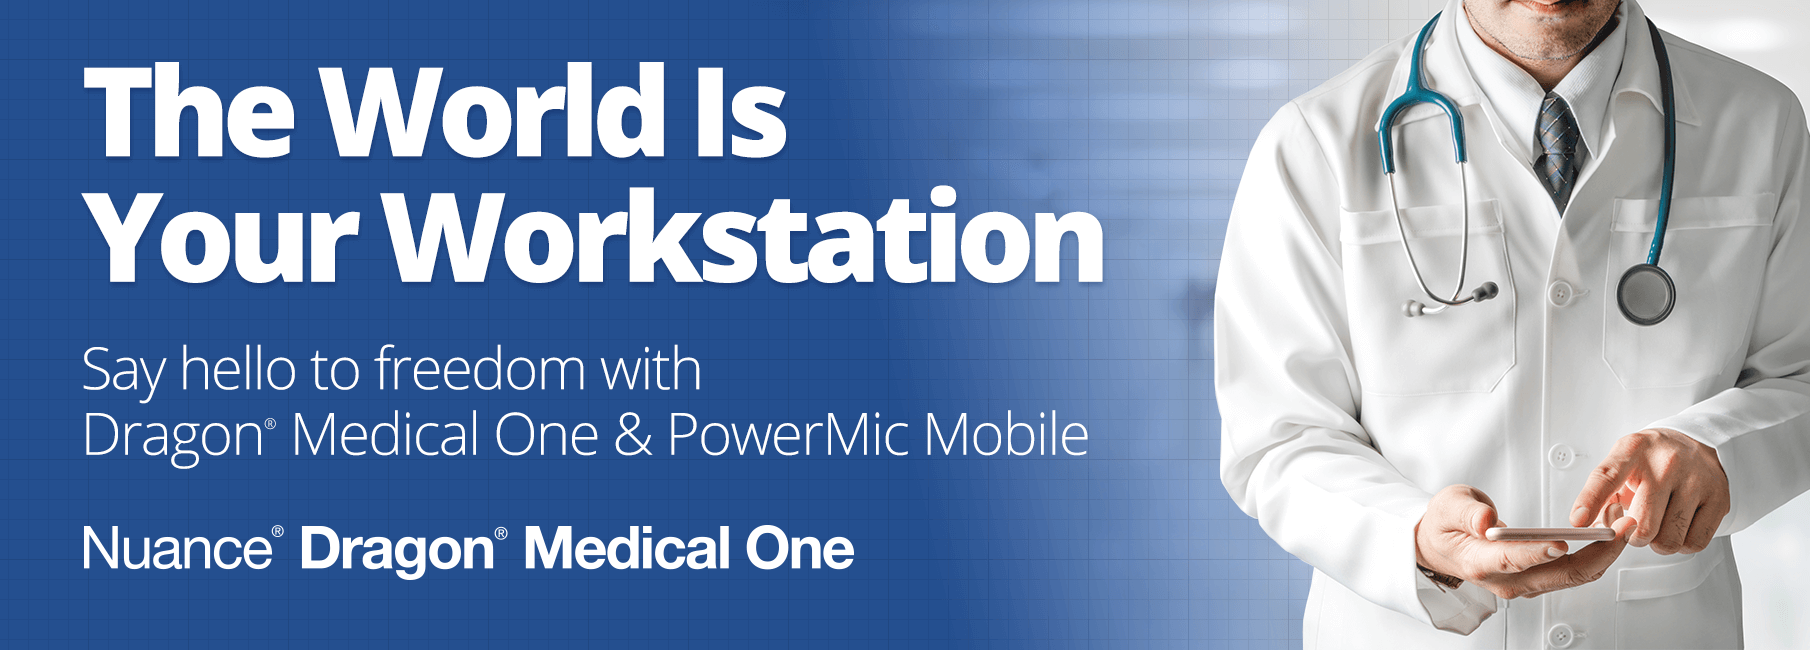 The world is your workstation. Say hello to freedom with Dragon Medical One & PowerMic Mobile.